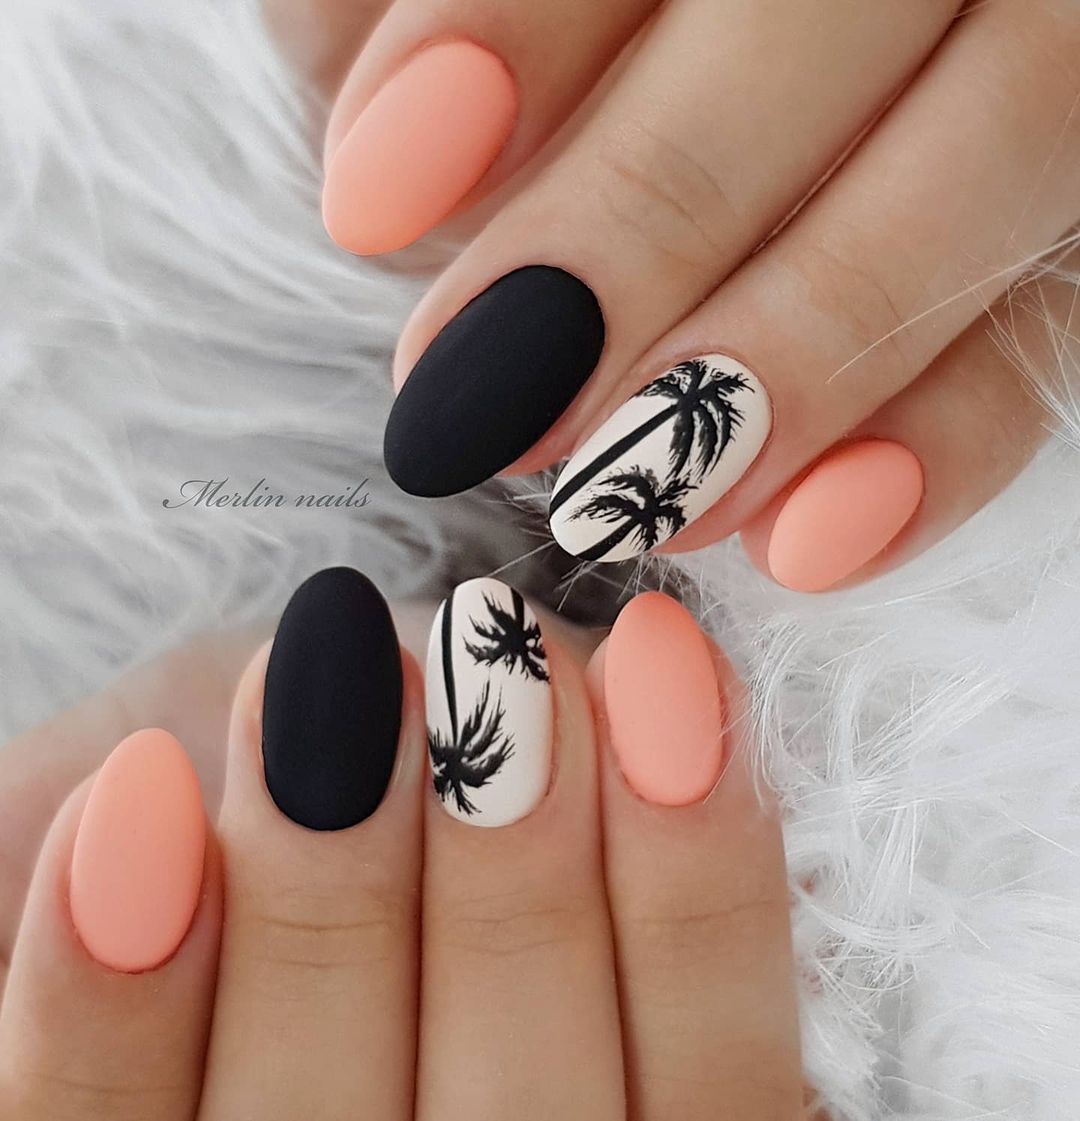 25 Trending Summer Nail Colors And Designs For 2021 images 16